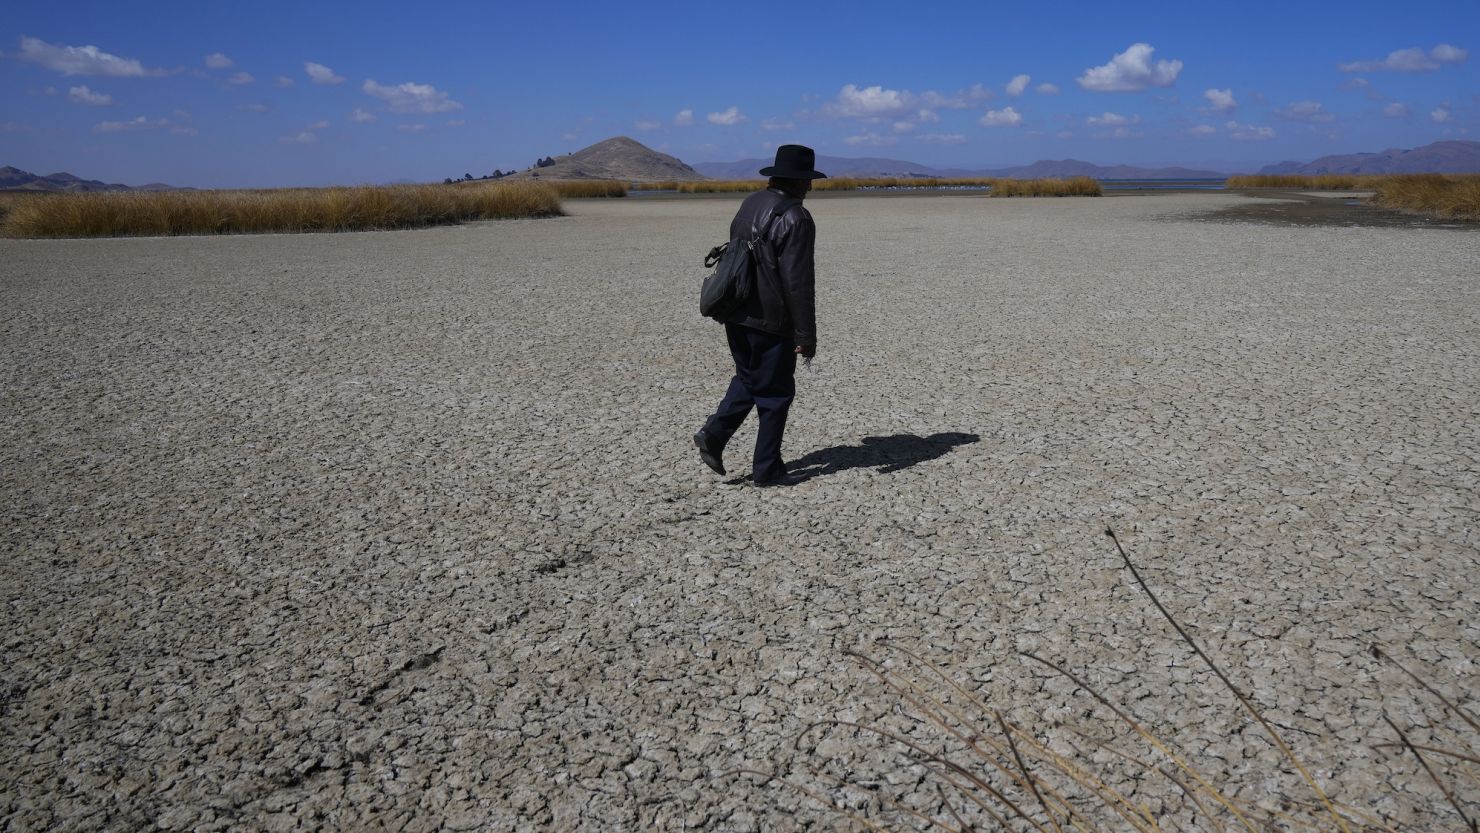 Parts of Lake Titicaca have dried out due to falling water levels.